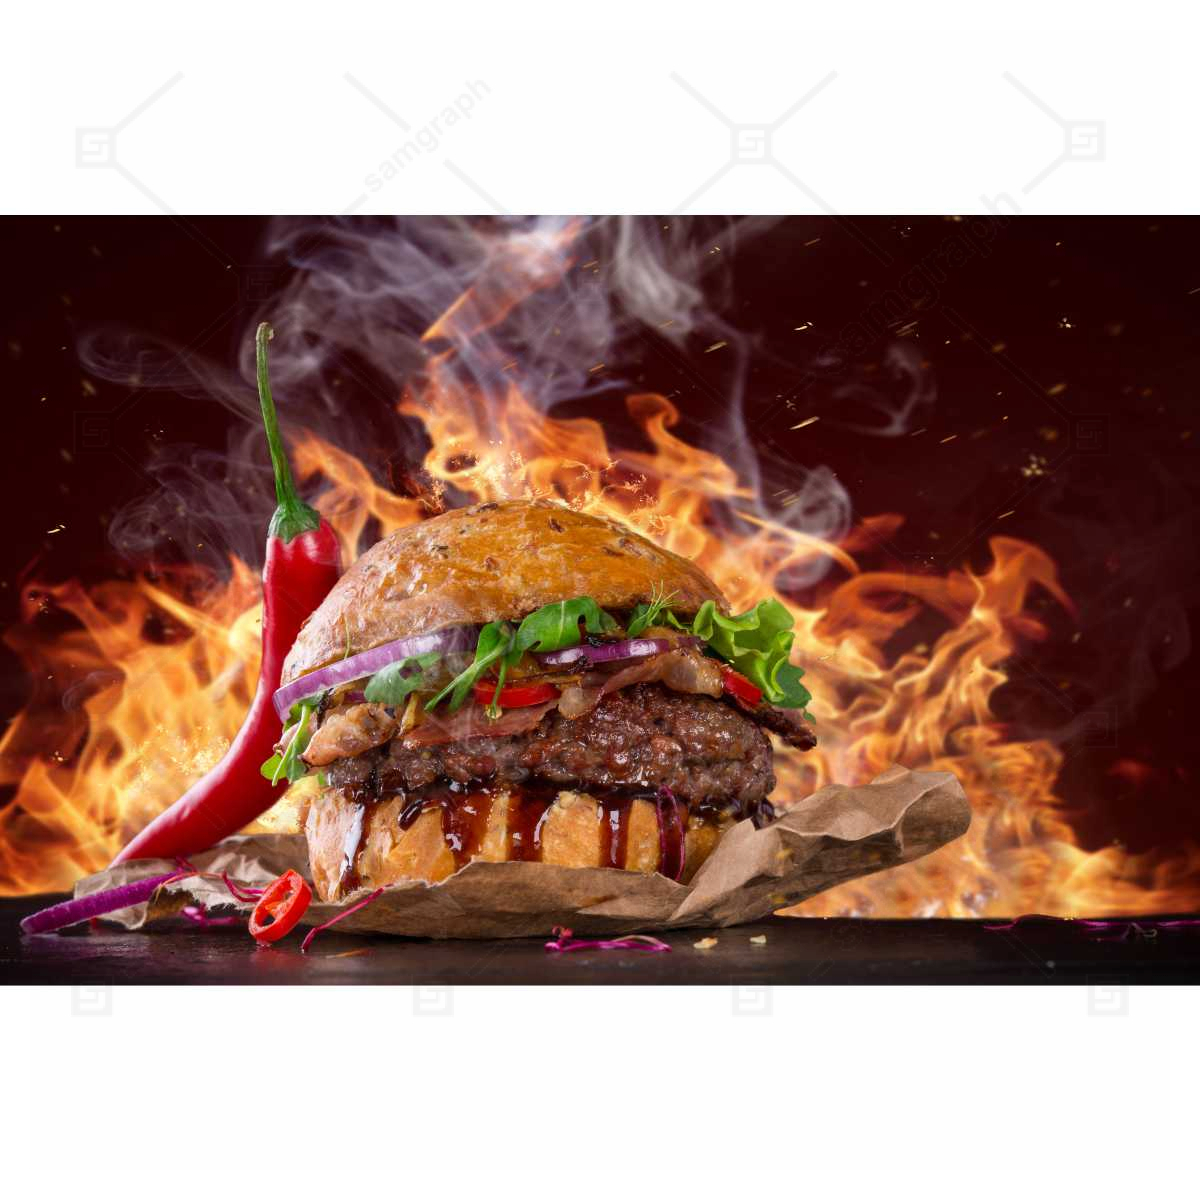 High quality photo of juicy hamburger with fire and pepper lettuce onion parsley 2 1 تصویر